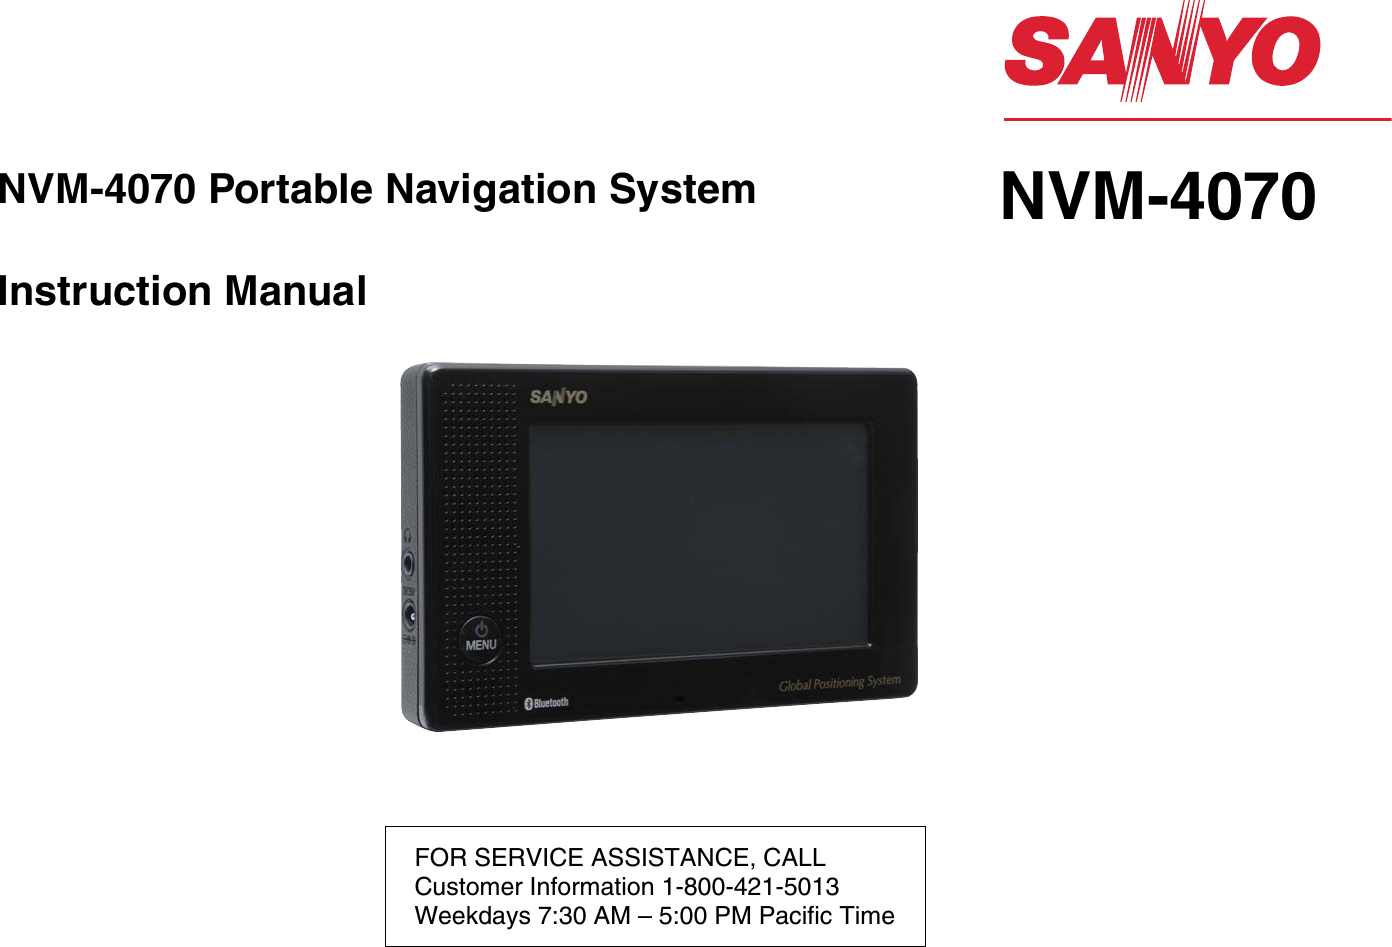 FOR SERVICE ASSISTANCE, CALLCustomer Information 1-800-421-5013Weekdays 7:30 AM – 5:00 PM Pacific TimeNVM-4070Instruction ManualNVM-4070 Portable Navigation System 